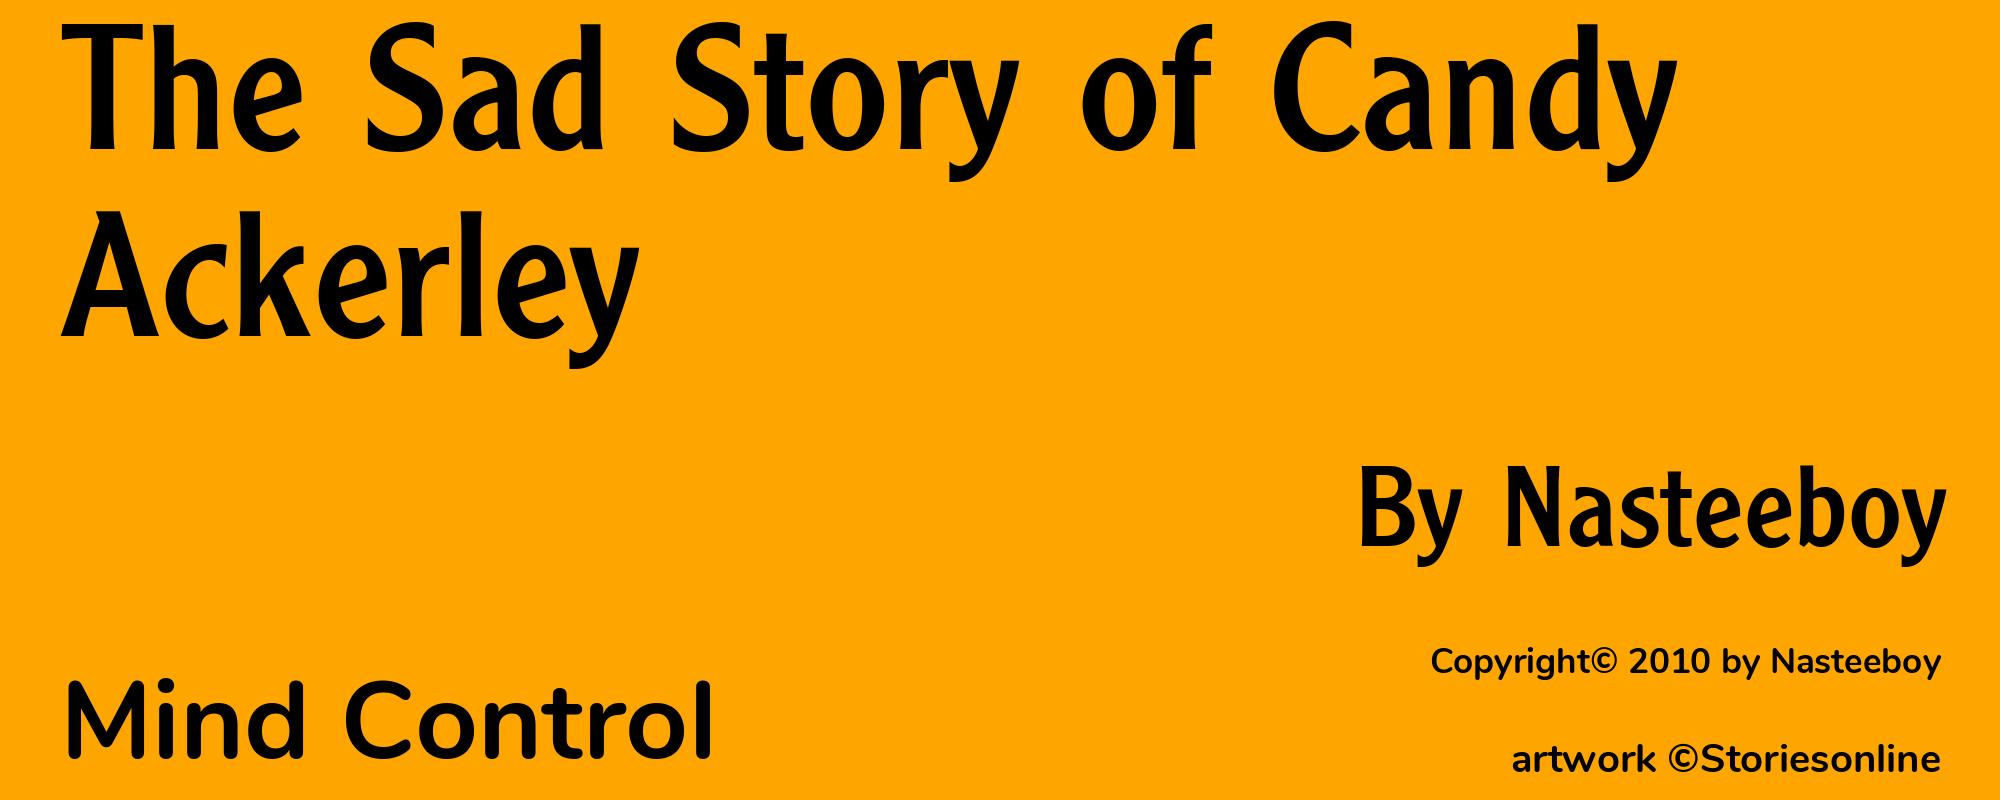 The Sad Story of Candy Ackerley - Cover